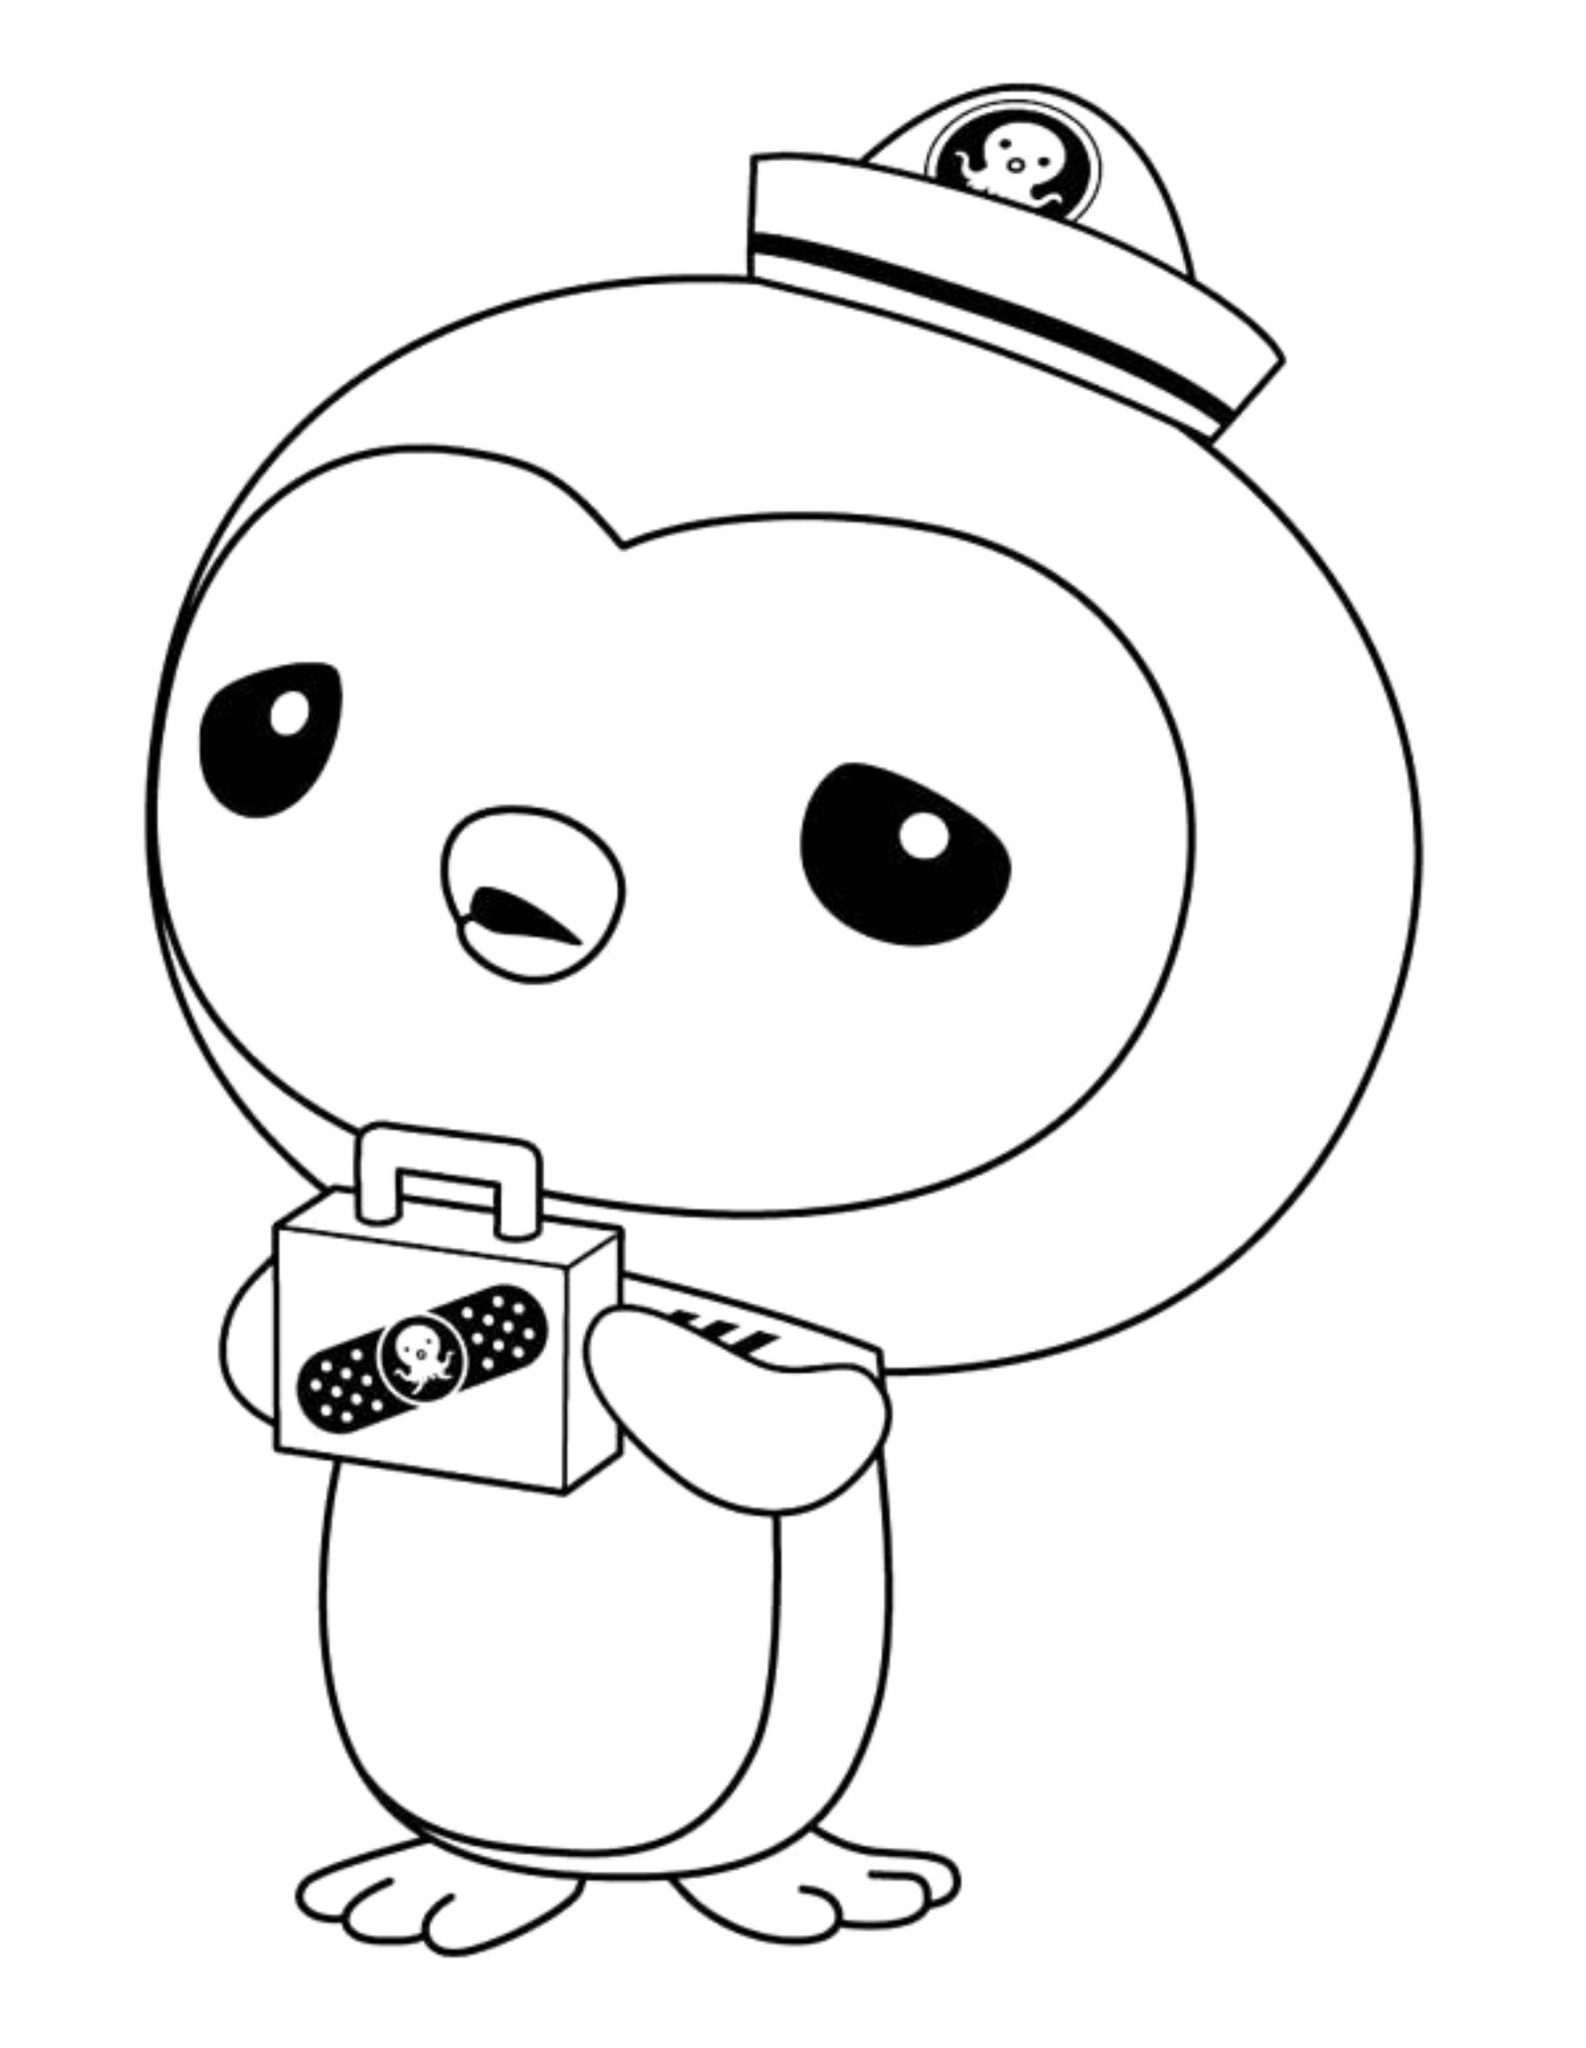 Octonauts Coloring Pages Printable Octonauts Coloring Pages For Your Kids Activity Best Apps For Kids